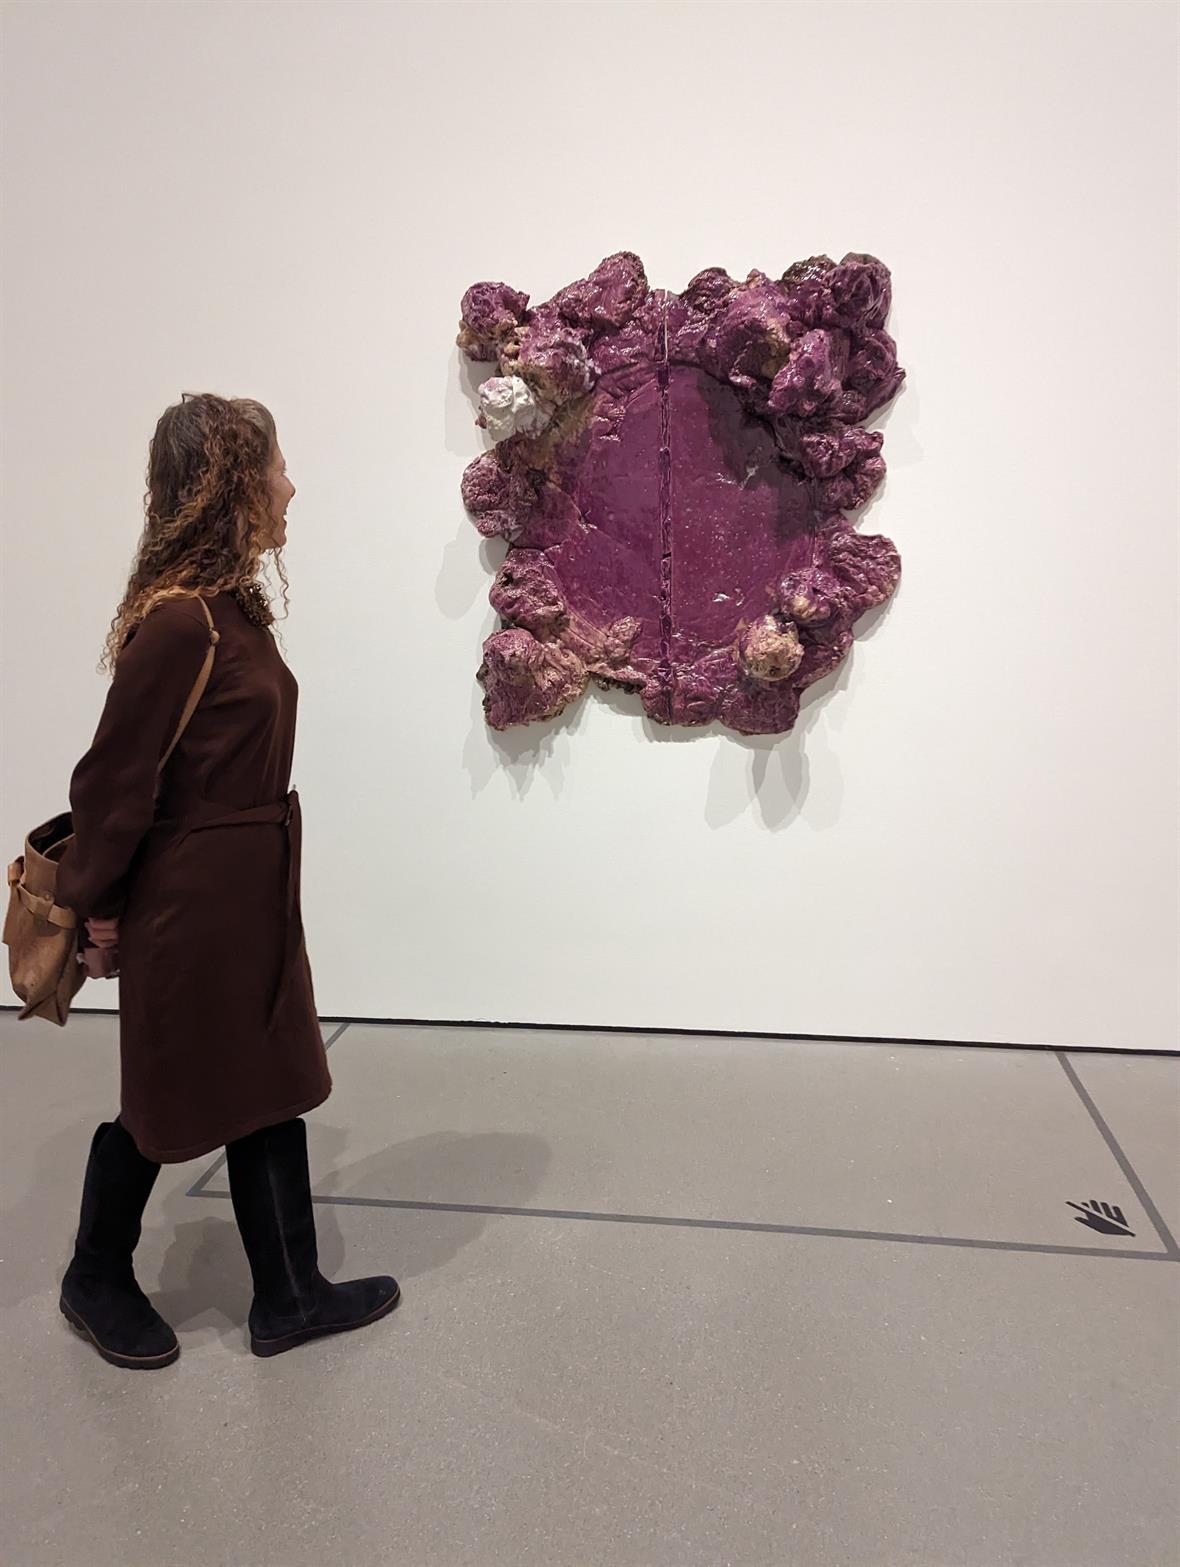 A vistor looks at a purple assemblage art piece on the museum wall.